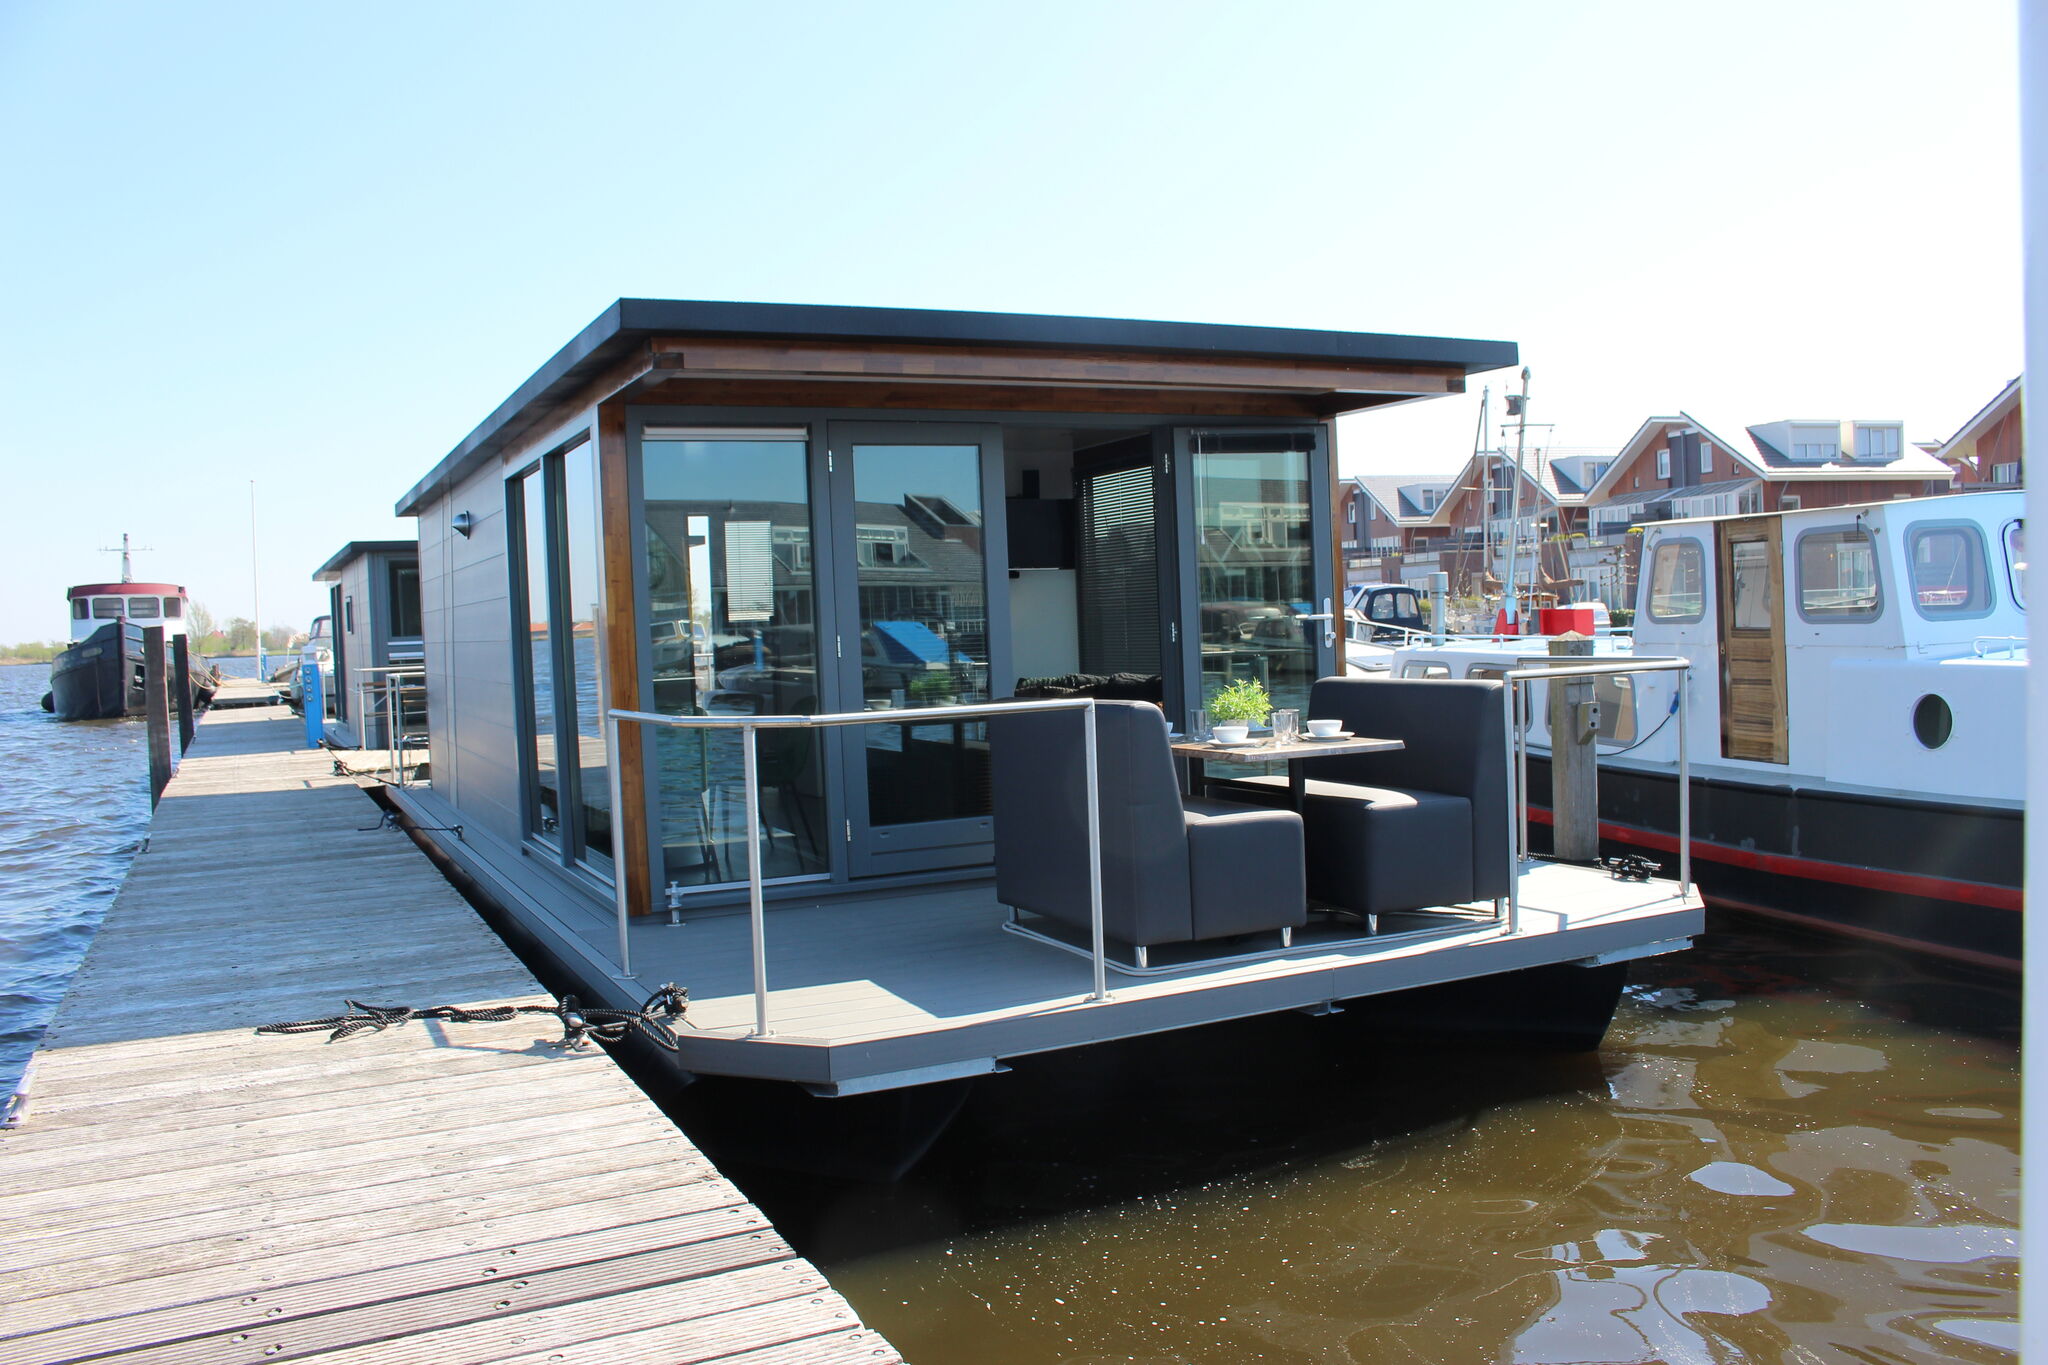 Cozy houseboat at the edge of the marina